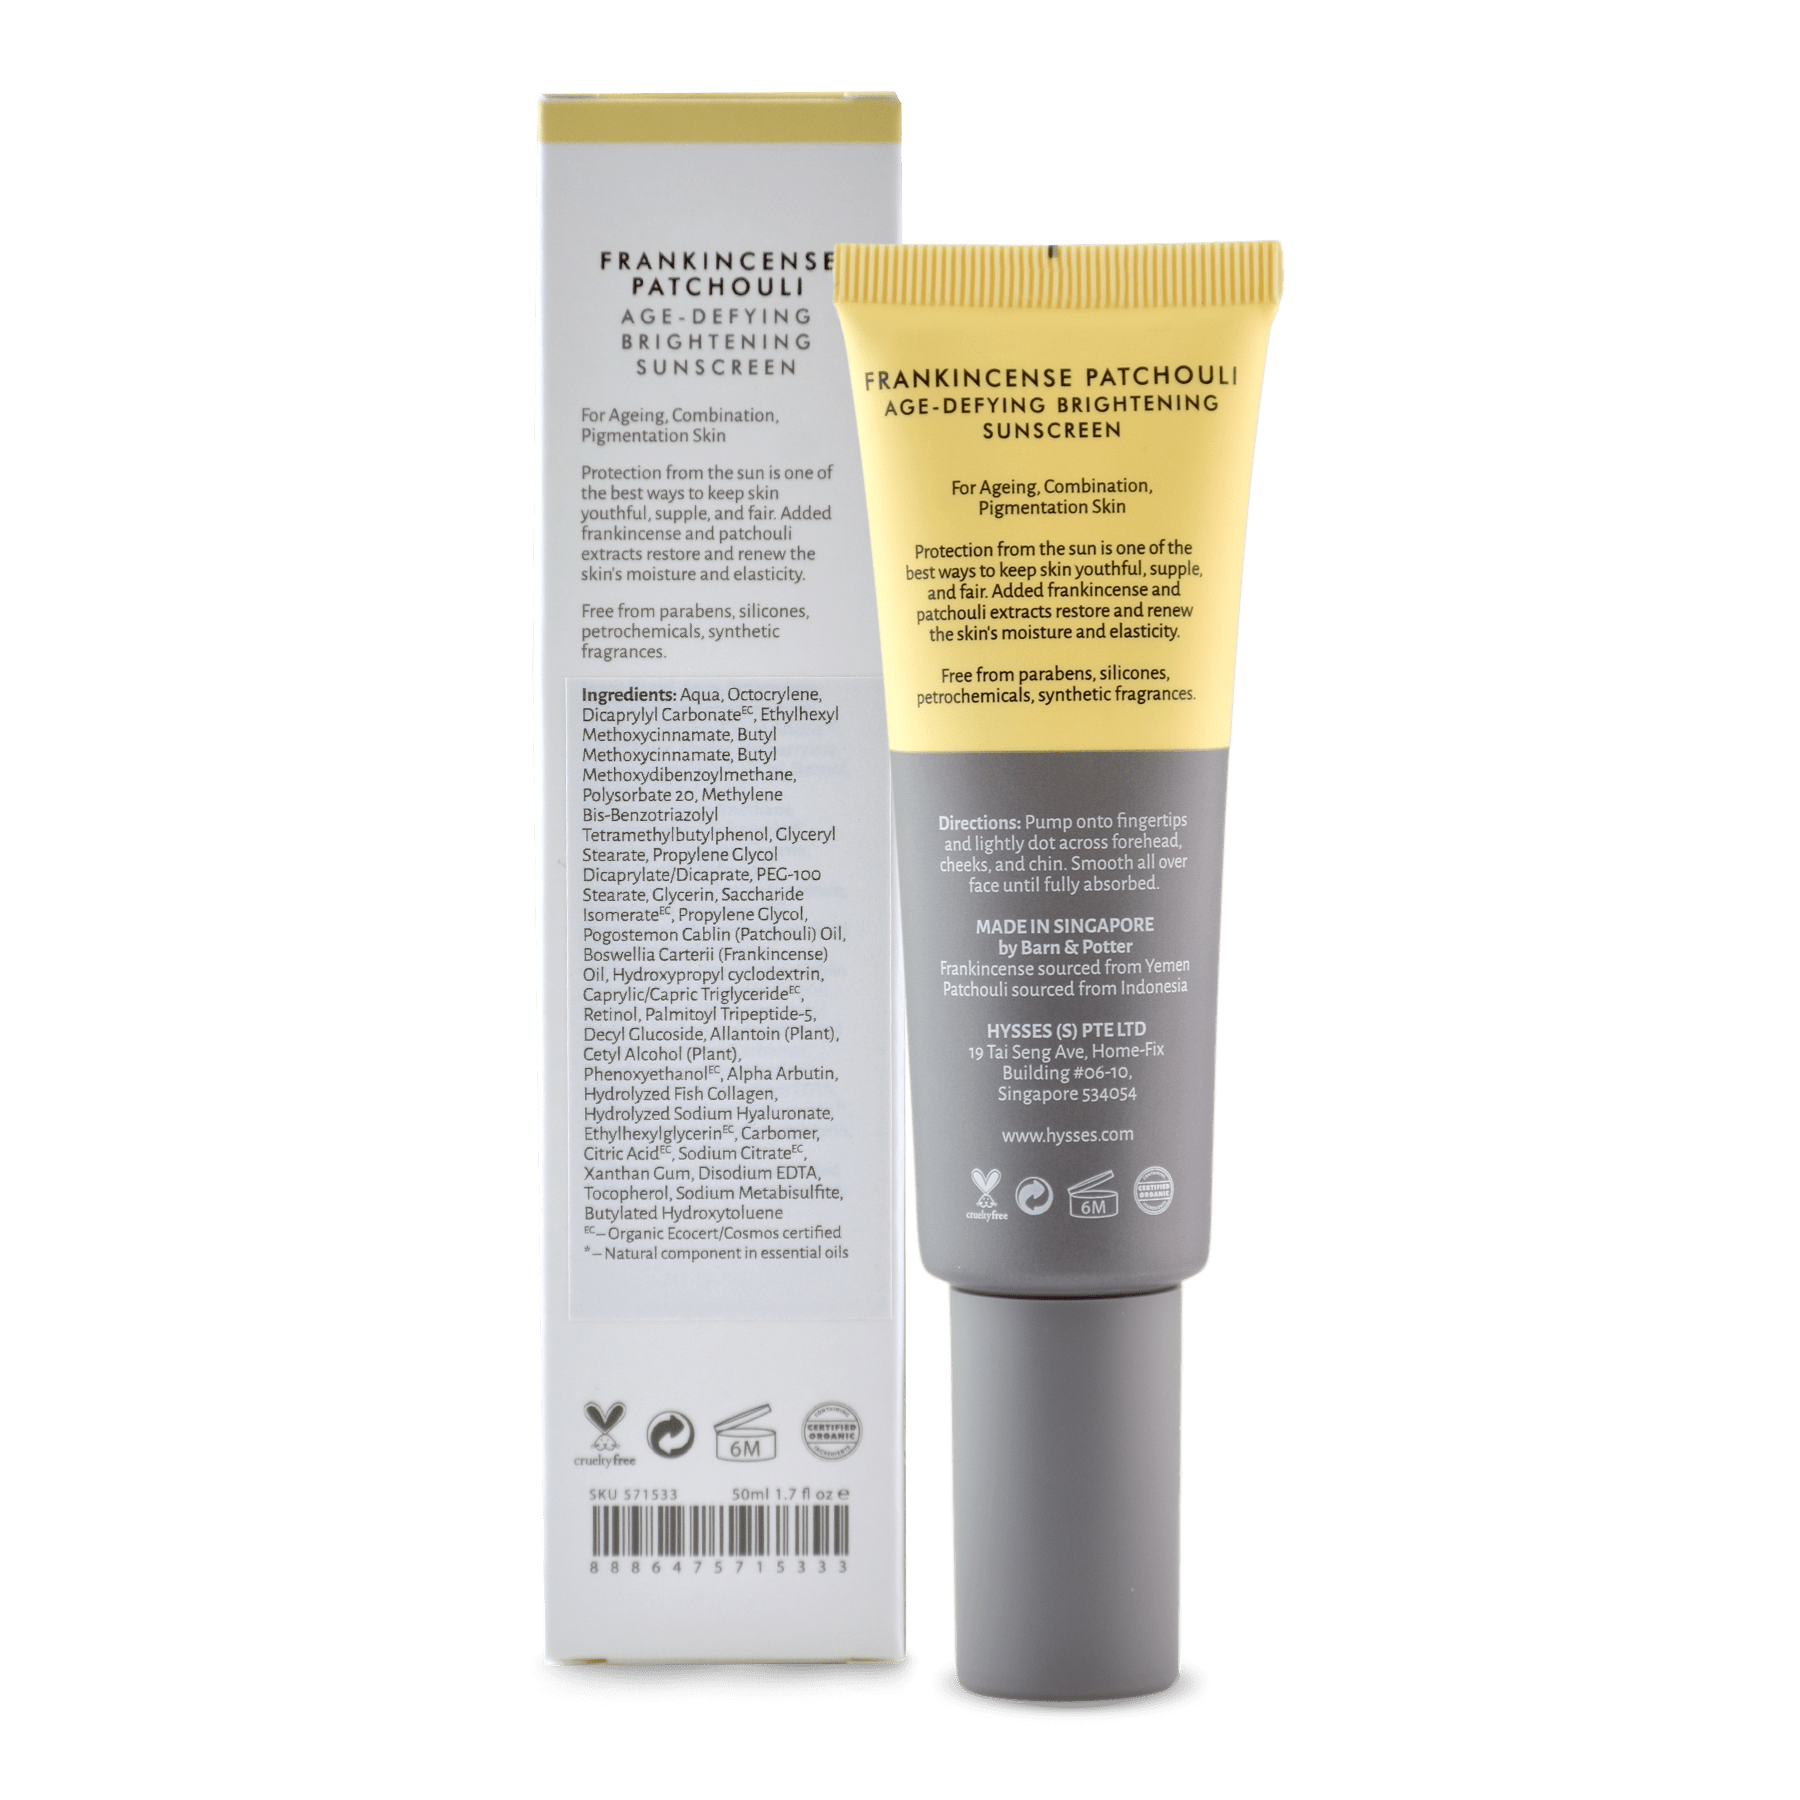 Hysses Face Care Age Defying Brightening Sunscreen Frankincense Patchouli SPF 40 / PA++